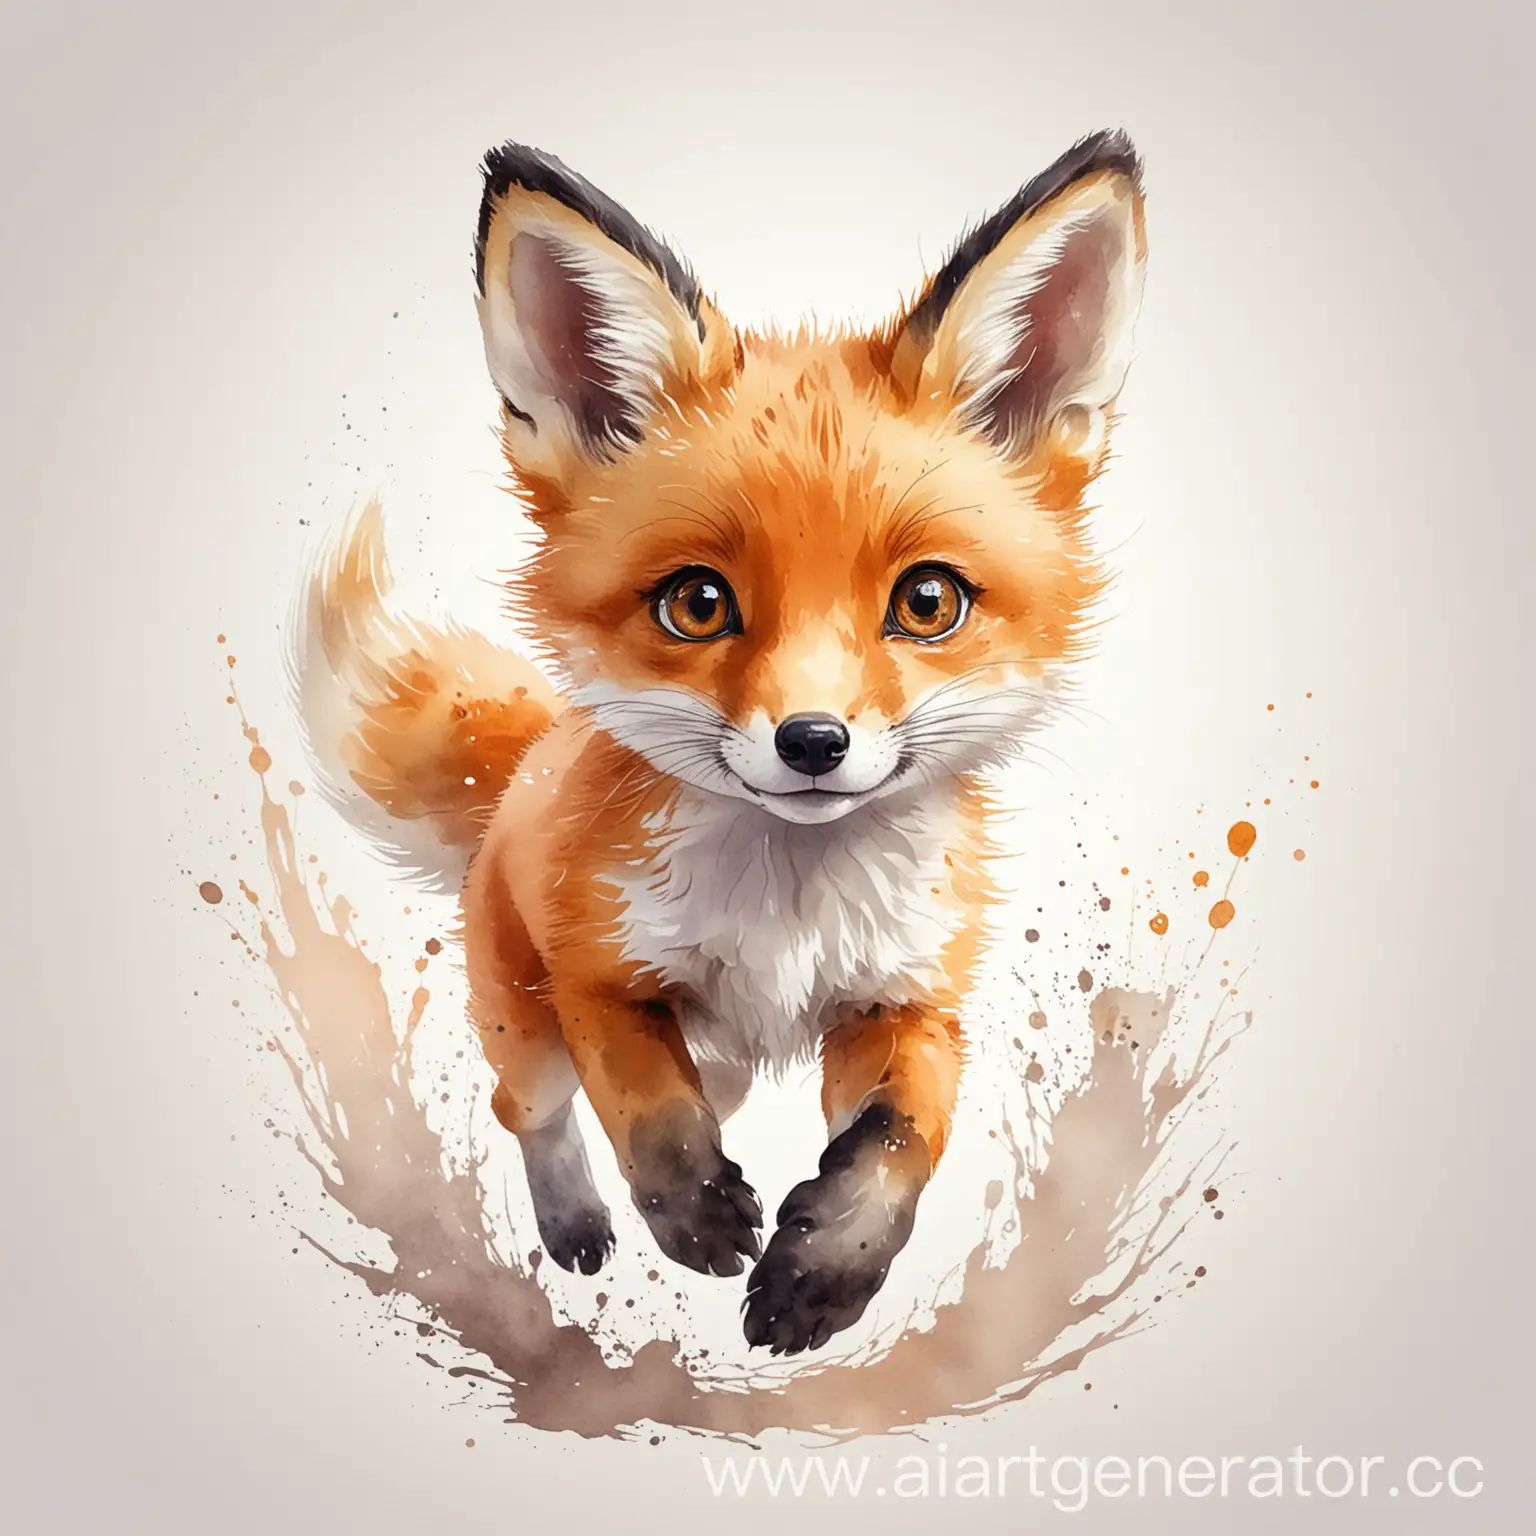 Cartoonish-Baby-Fox-Jumping-with-Big-Eyes-in-Watercolor-Style